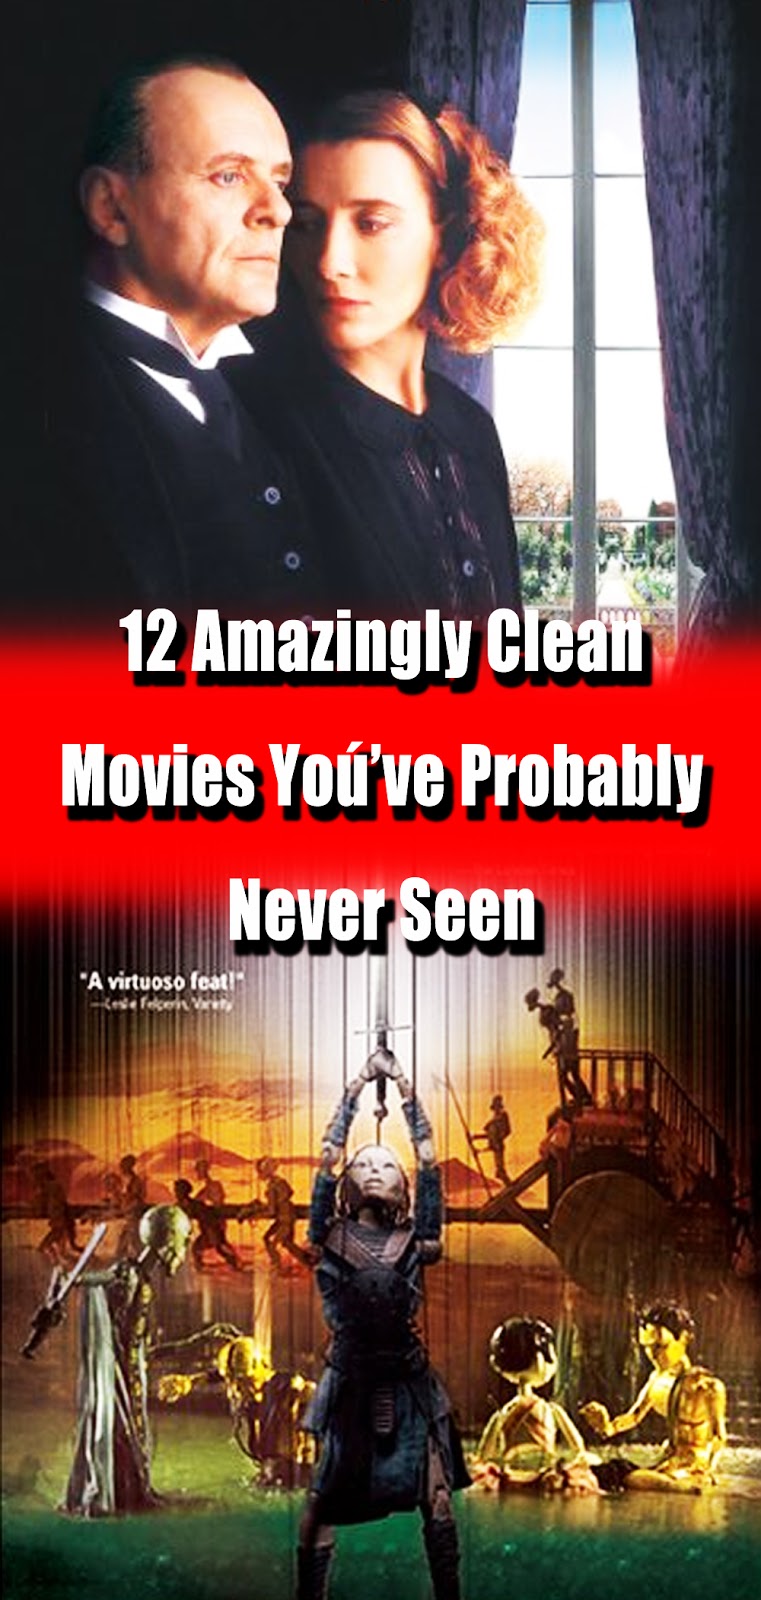 12 Amazingly Clean Movies Yoú’ve Probably Never Seen 3 SECONDS